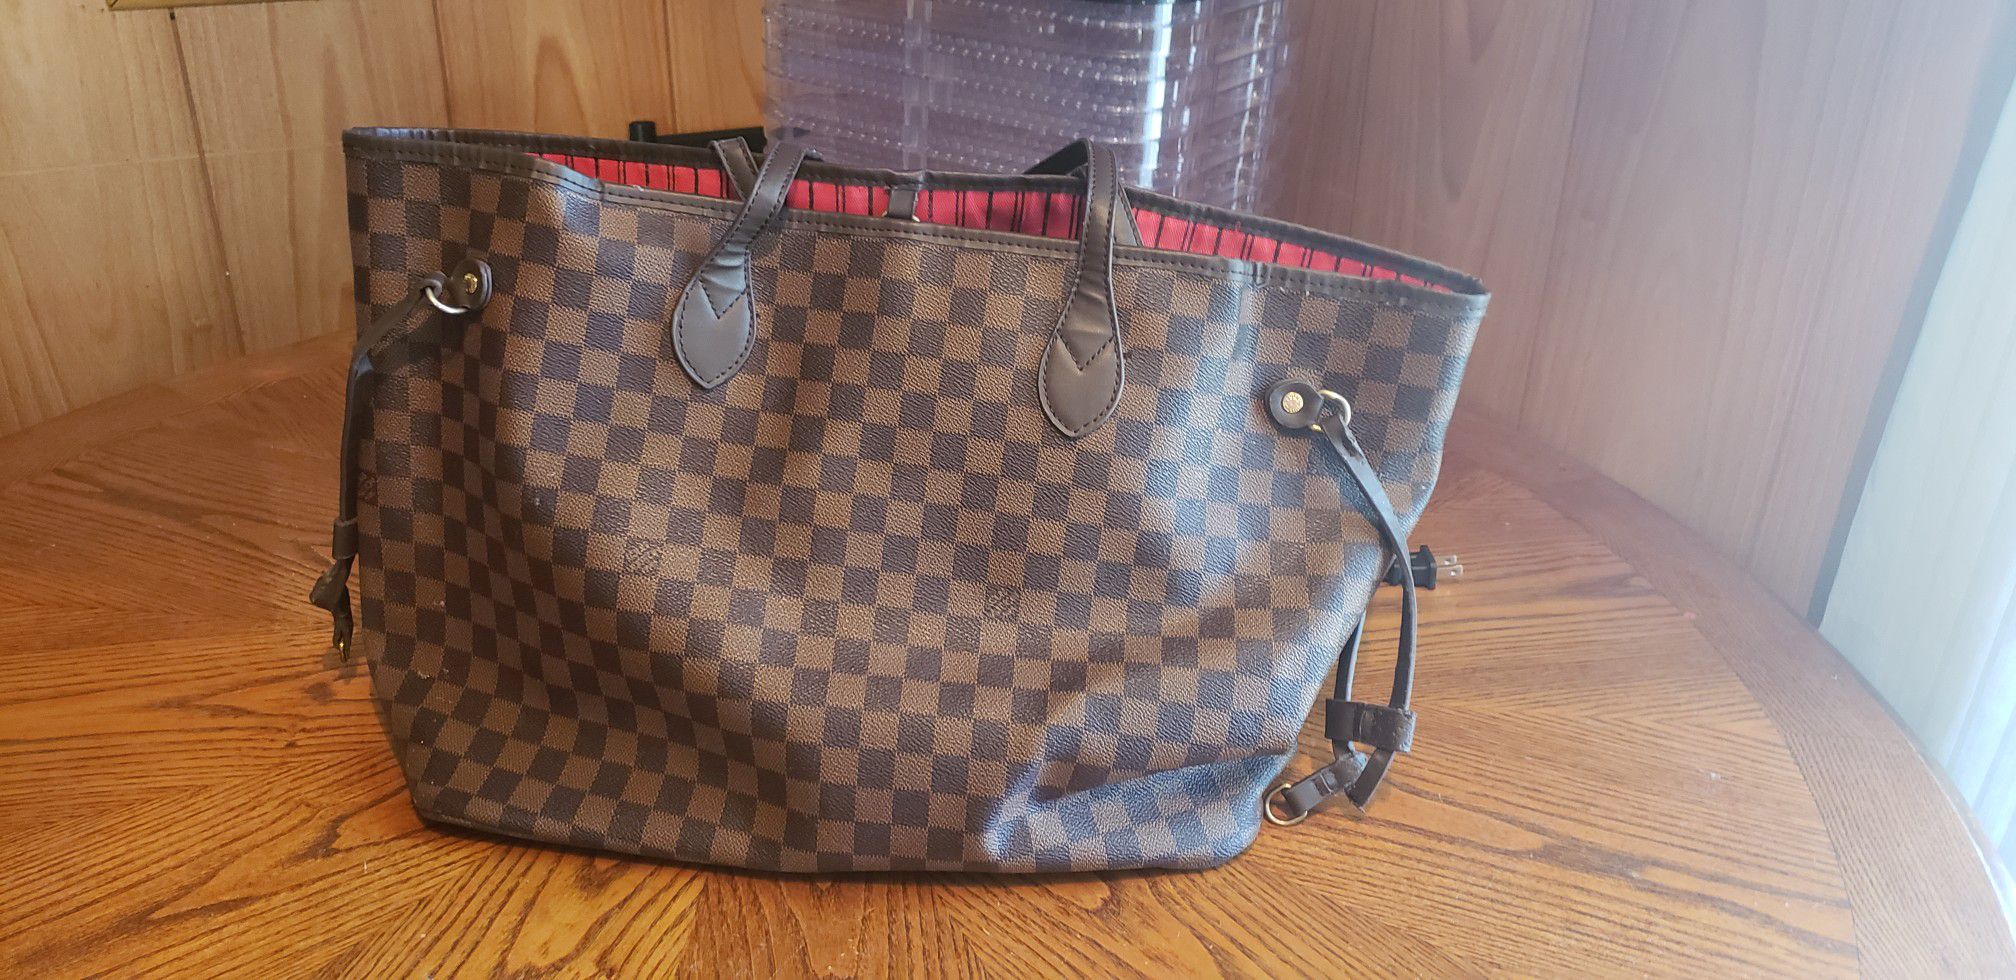 Louis Vuitton large hand bag originally 2,300$ as seen in the 3rd picture